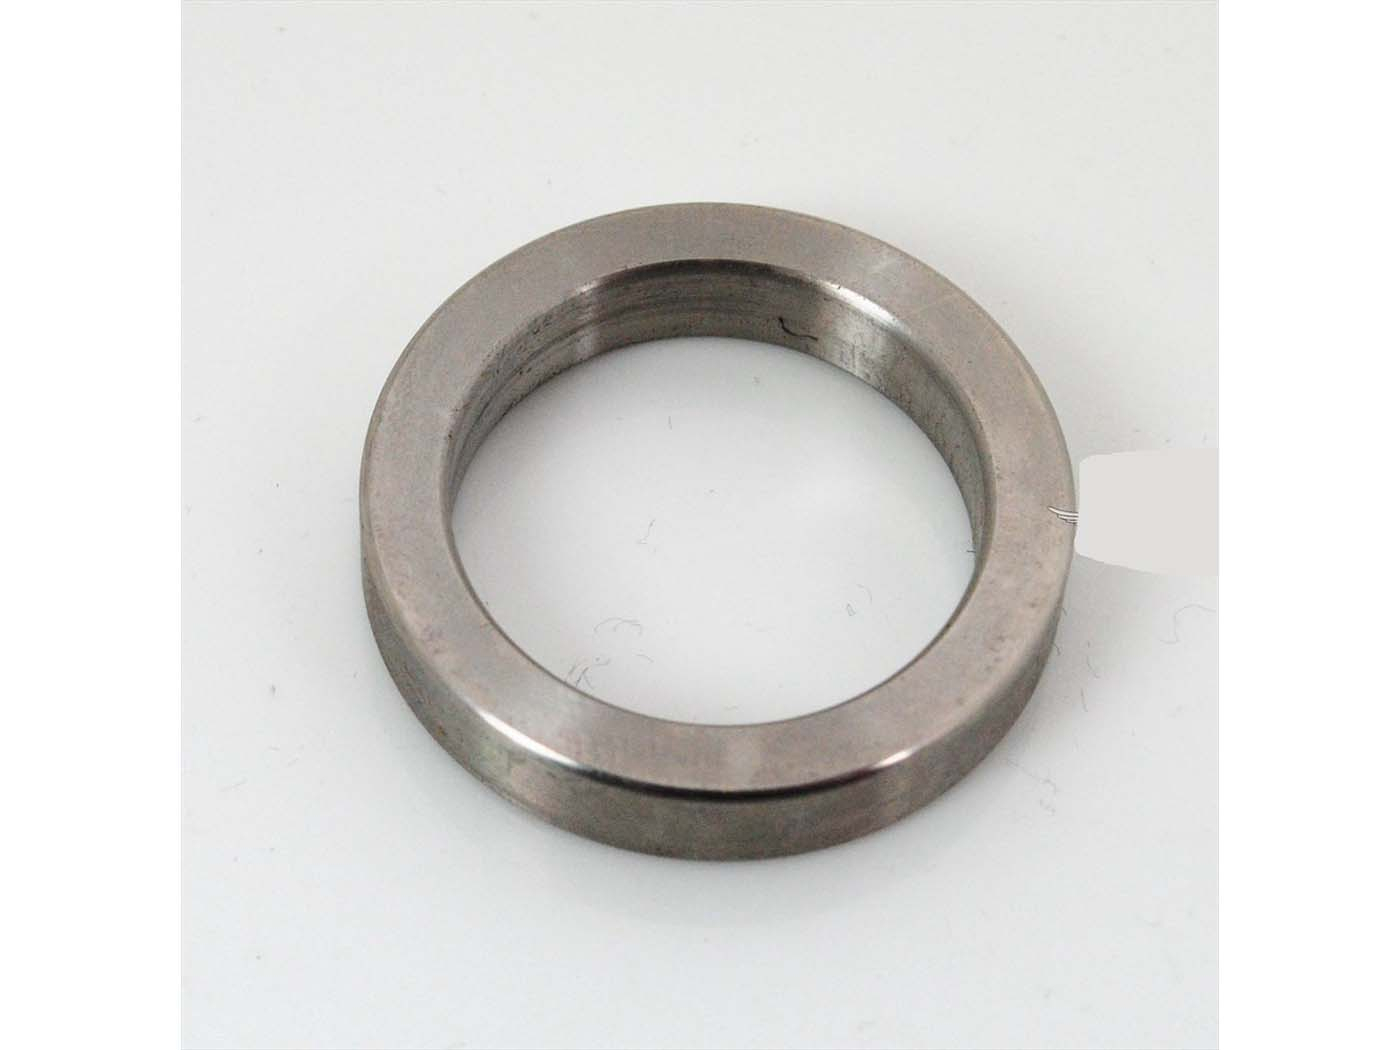 Bearing Outer Ring Dimensions: 23.5 X 31.5 6mm For Hercules, Miele, DKW, Rixe, KTM, Göricke, Gritzner Moped Mokick